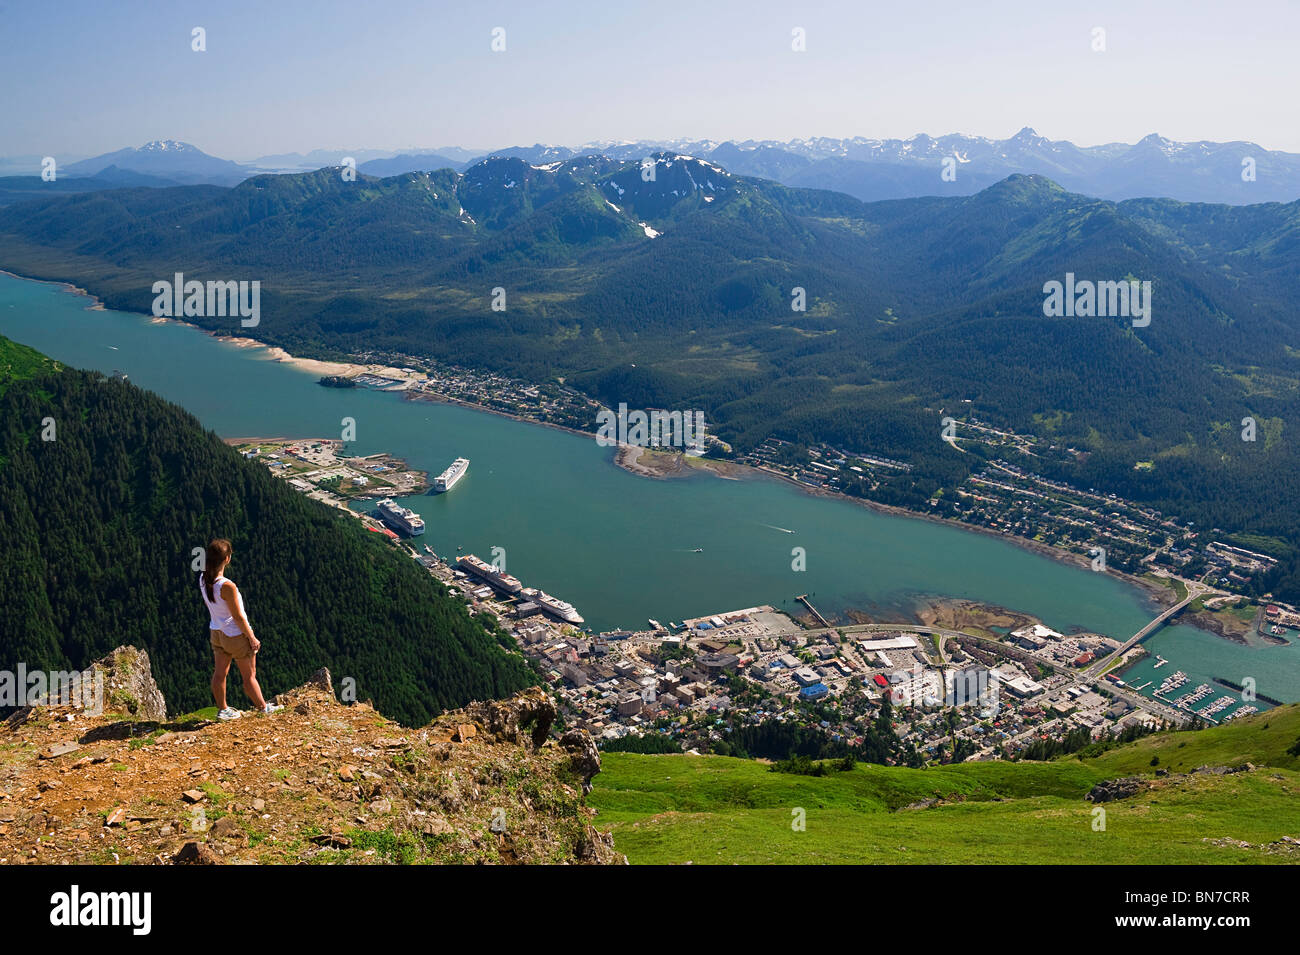 A hiker takes in the view of Gastineau Channel, Douglas Island, and Downtown Juneau from the top of Mt. Juneau in Alaska Stock Photo